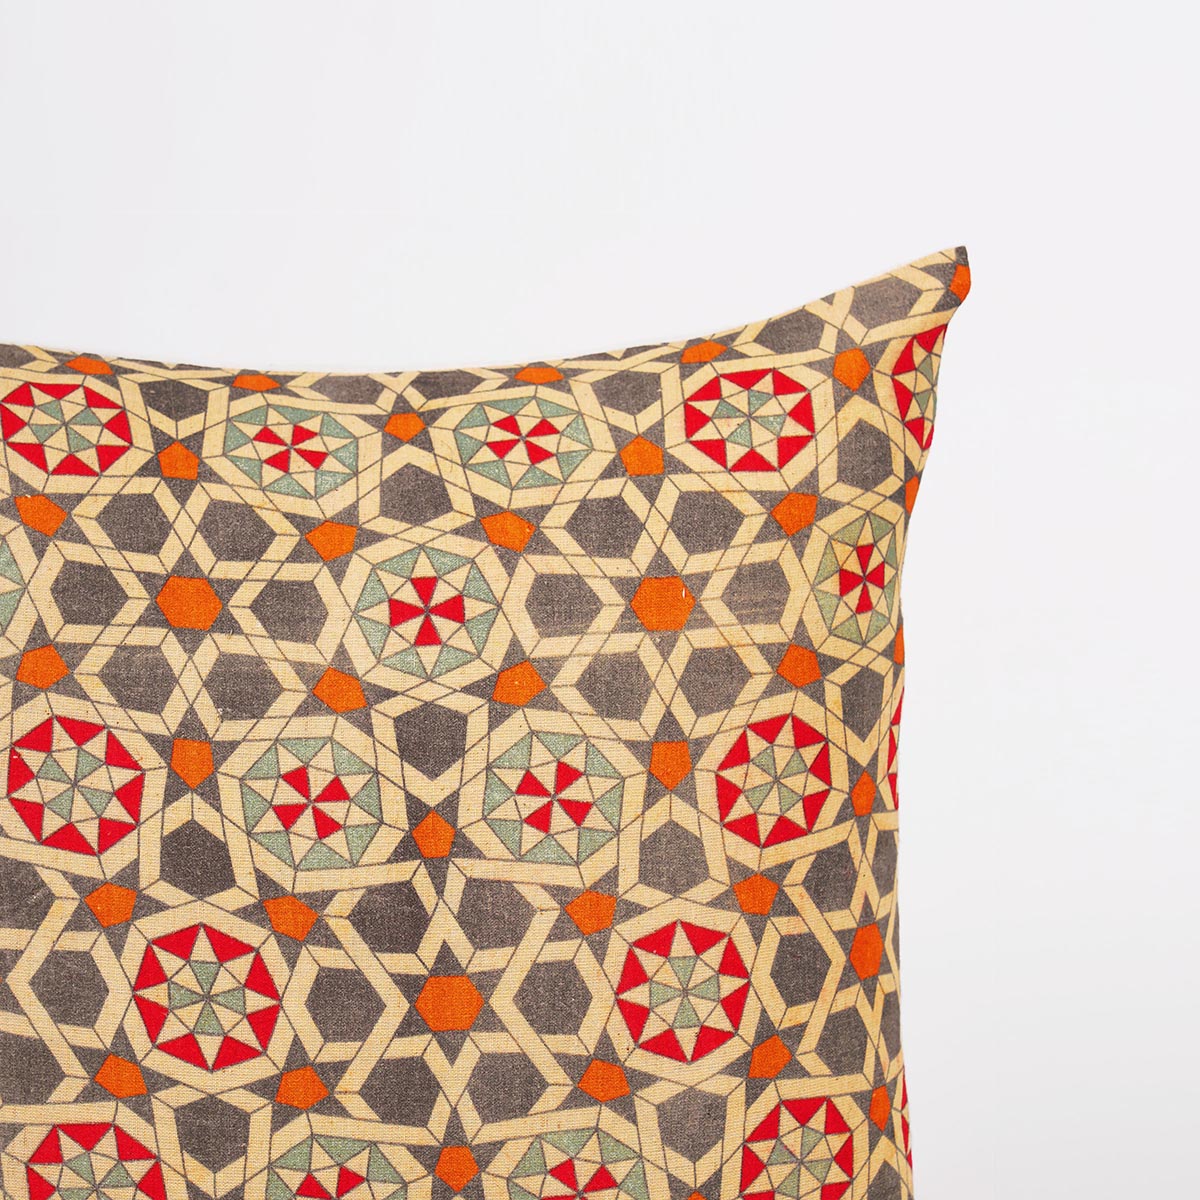 Zellij - Pillow cover with Islamic geometrical pattern print, sizes available